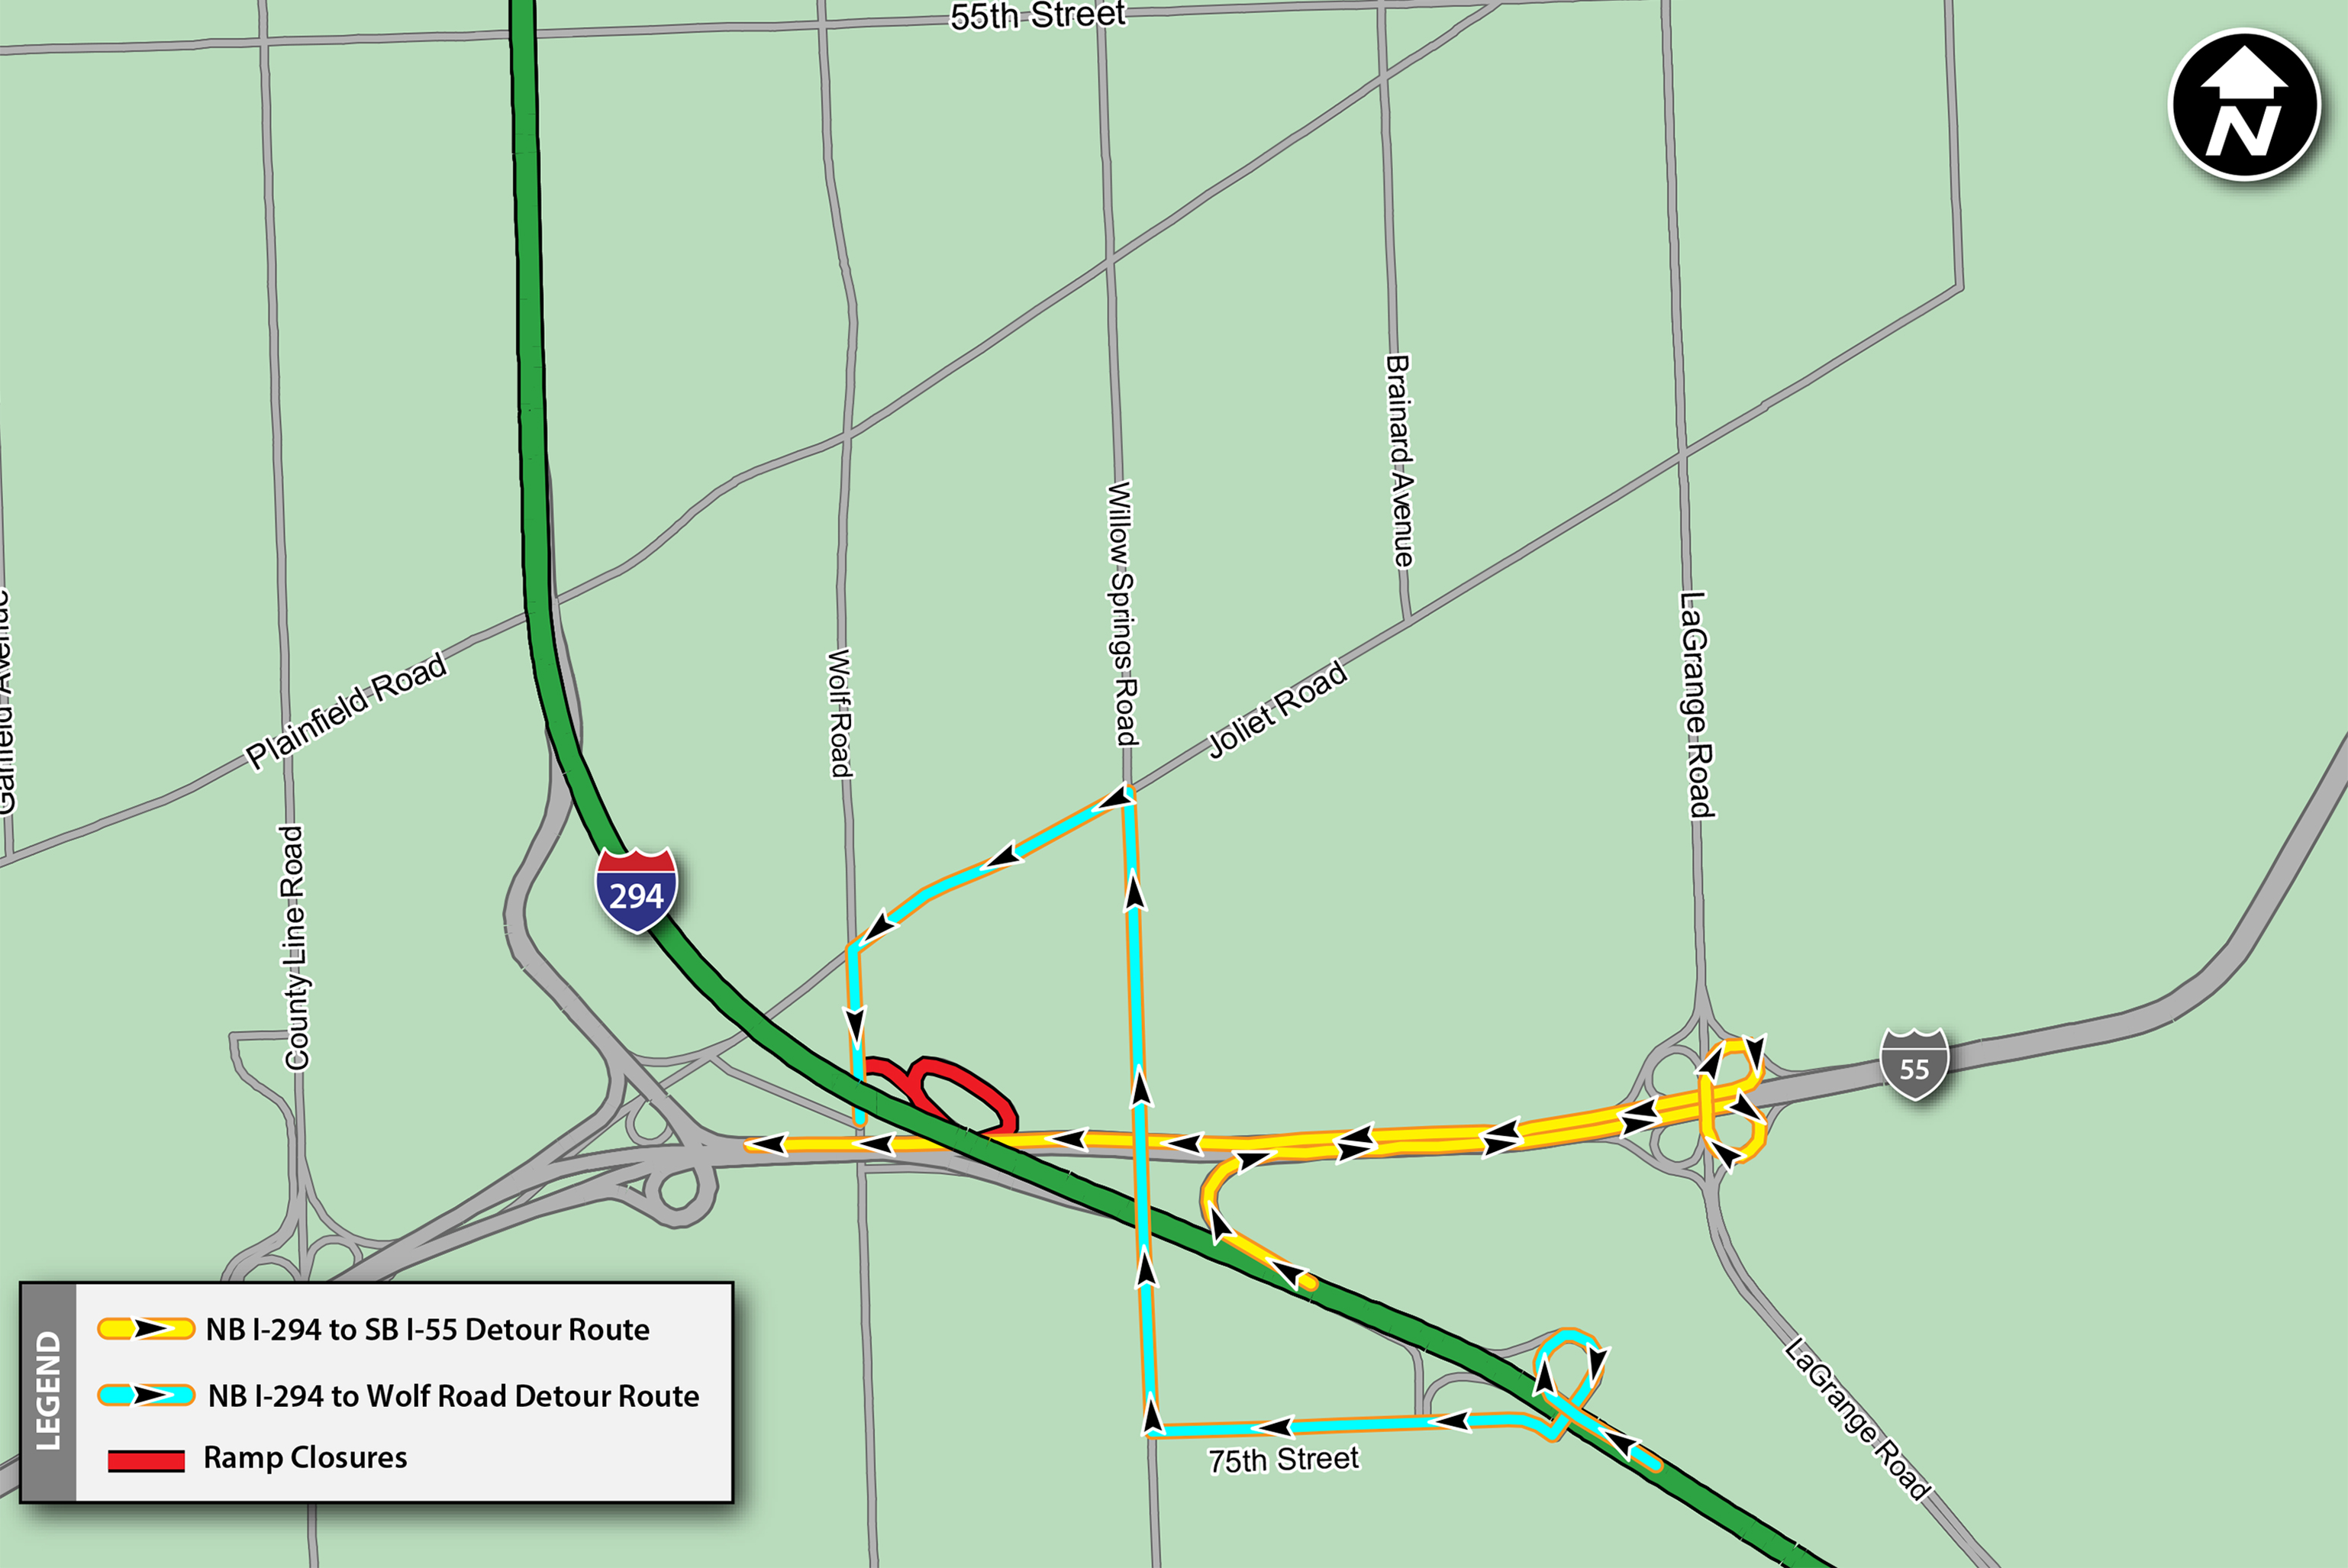 NB I-294 to SB I-55 and Wolf Road Detour